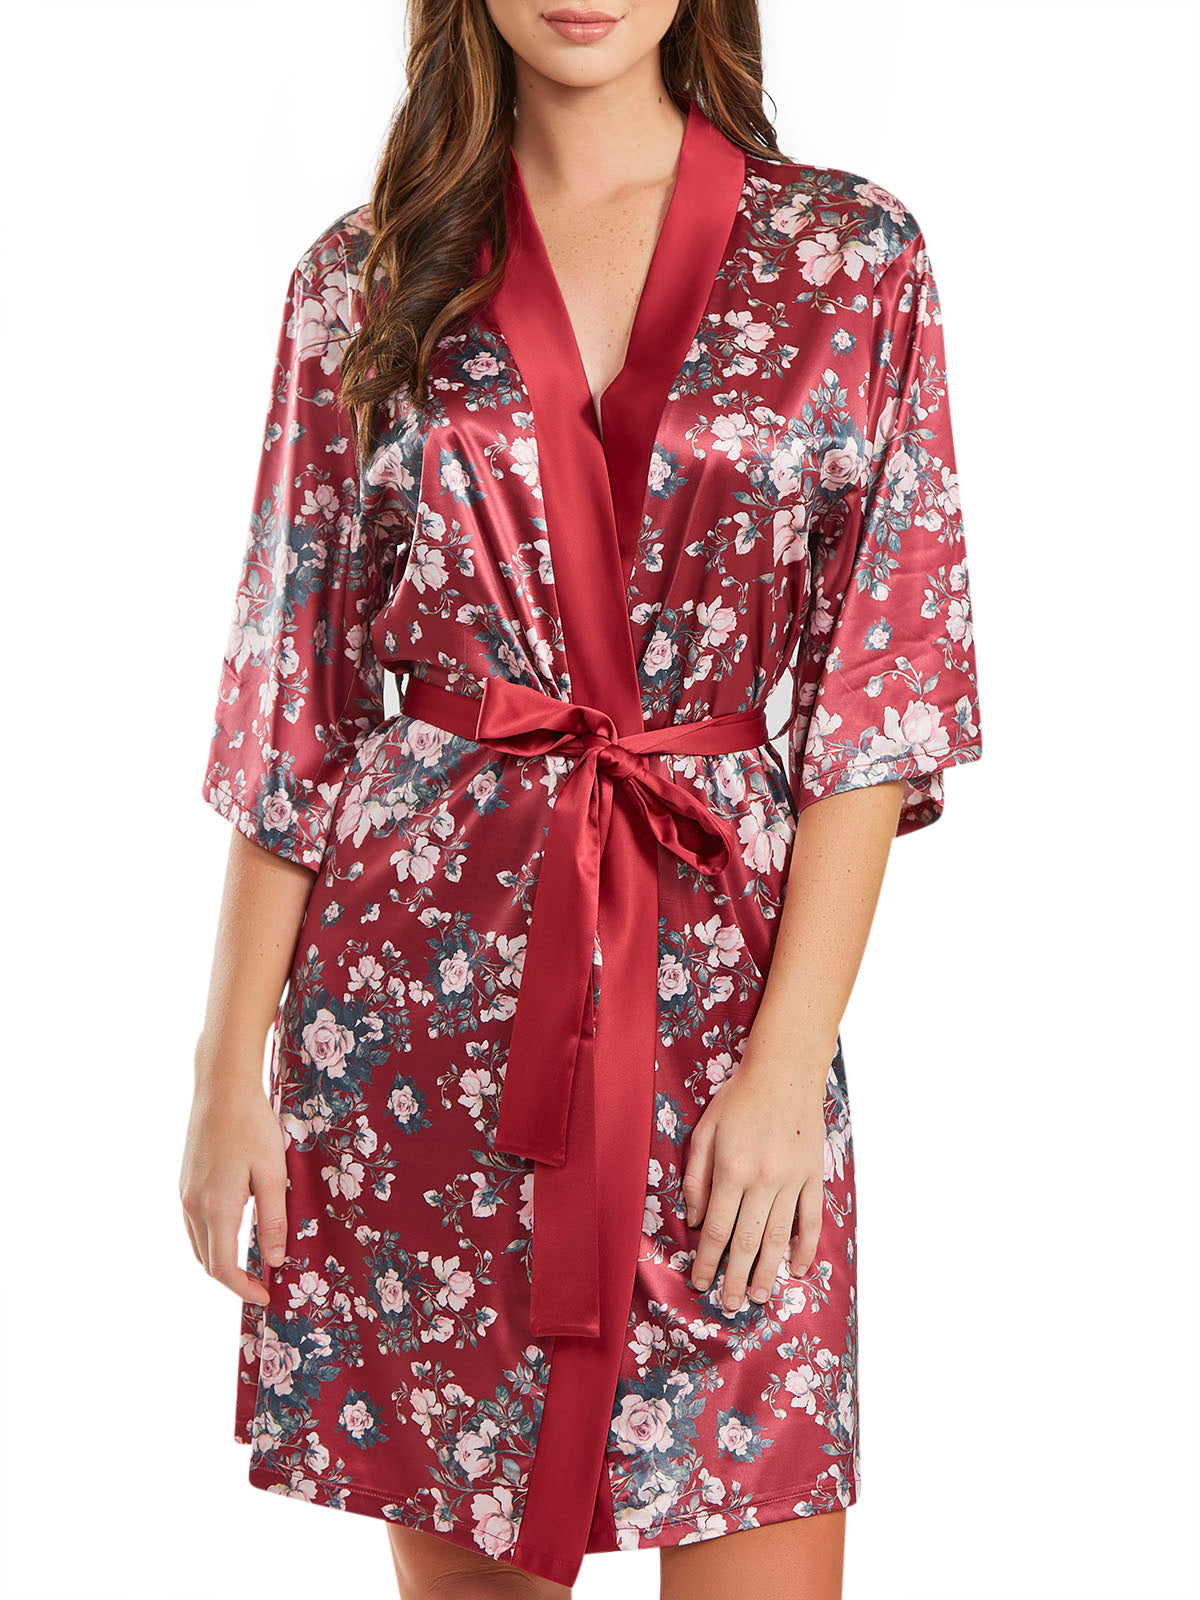 iCollection Robe Women's Brittany Robe Loungewear